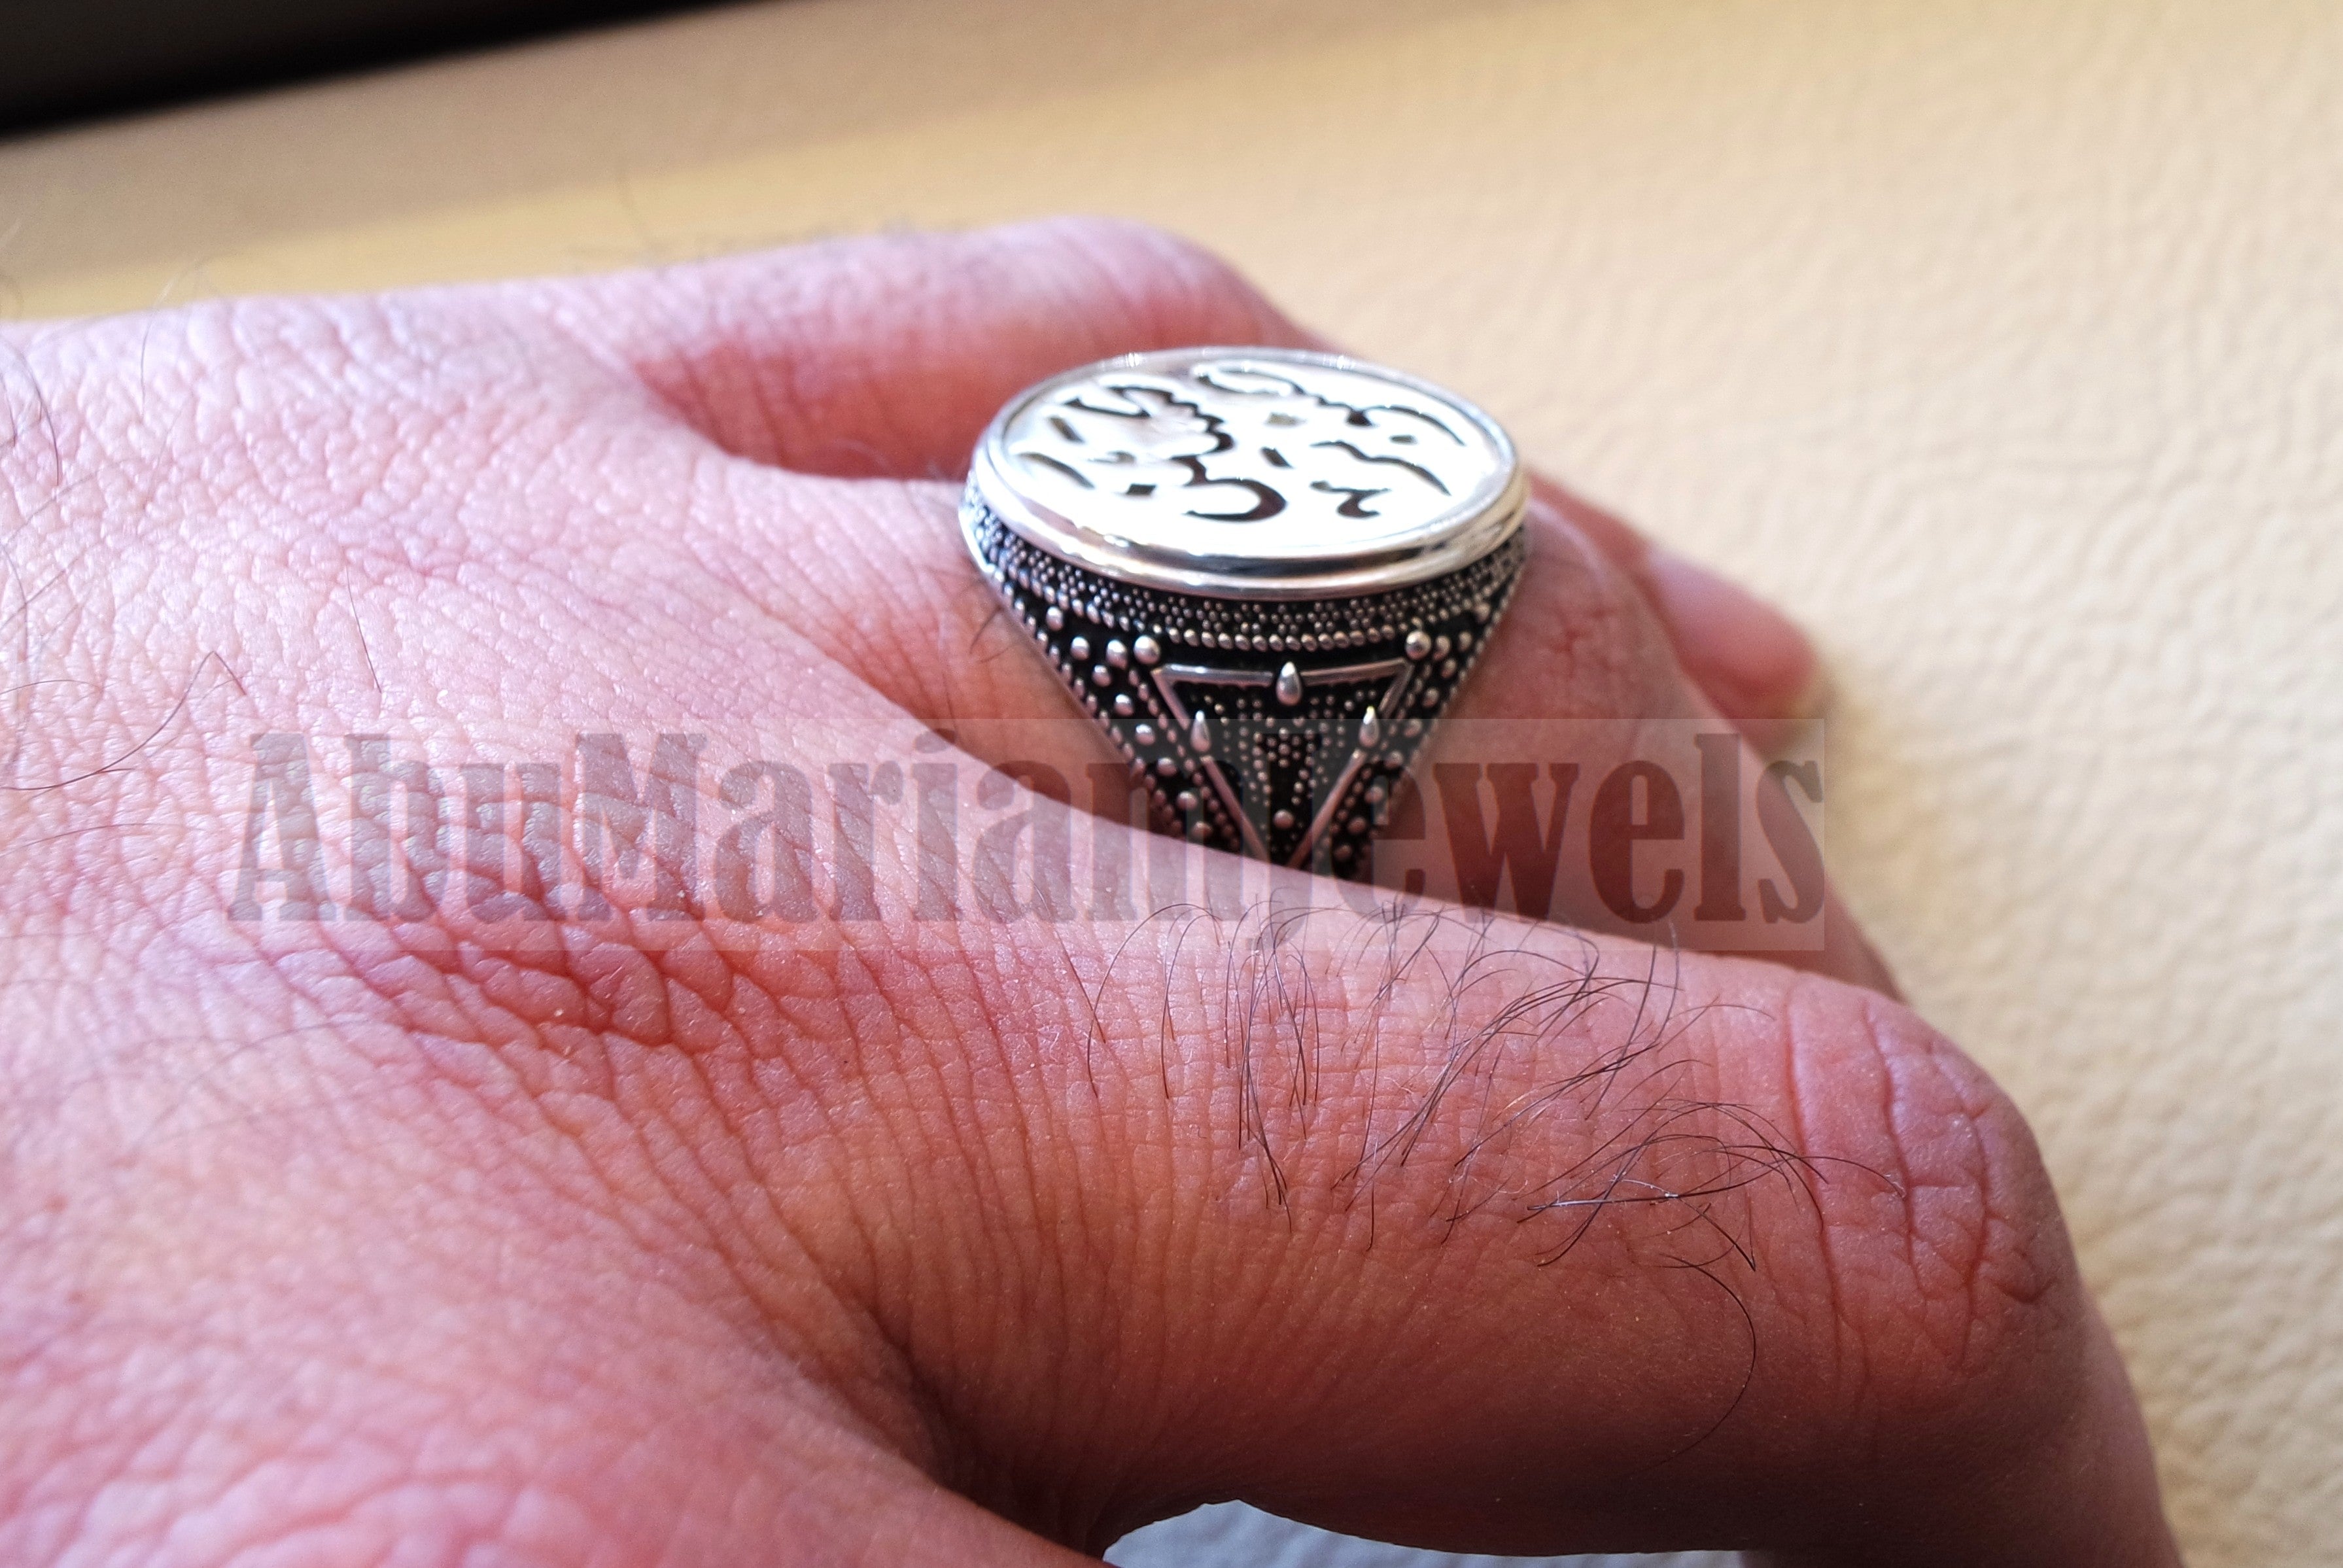 Customized Arabic calligraphy names ring personalized antique jewelry style sterling silver 925  any size TSN1001 خاتم اسم تفصيل